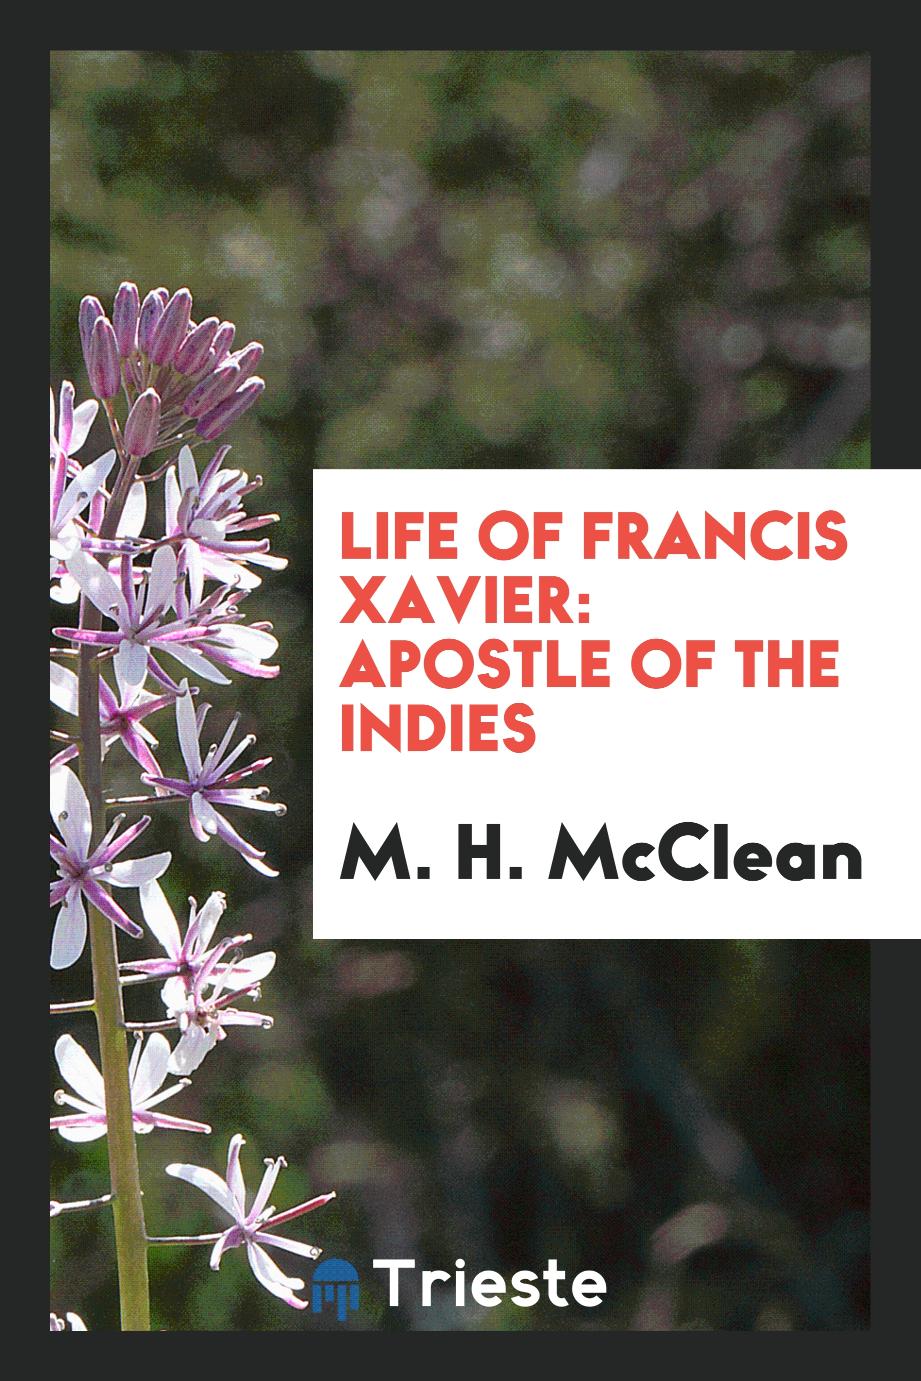 Life of Francis Xavier: apostle of the Indies